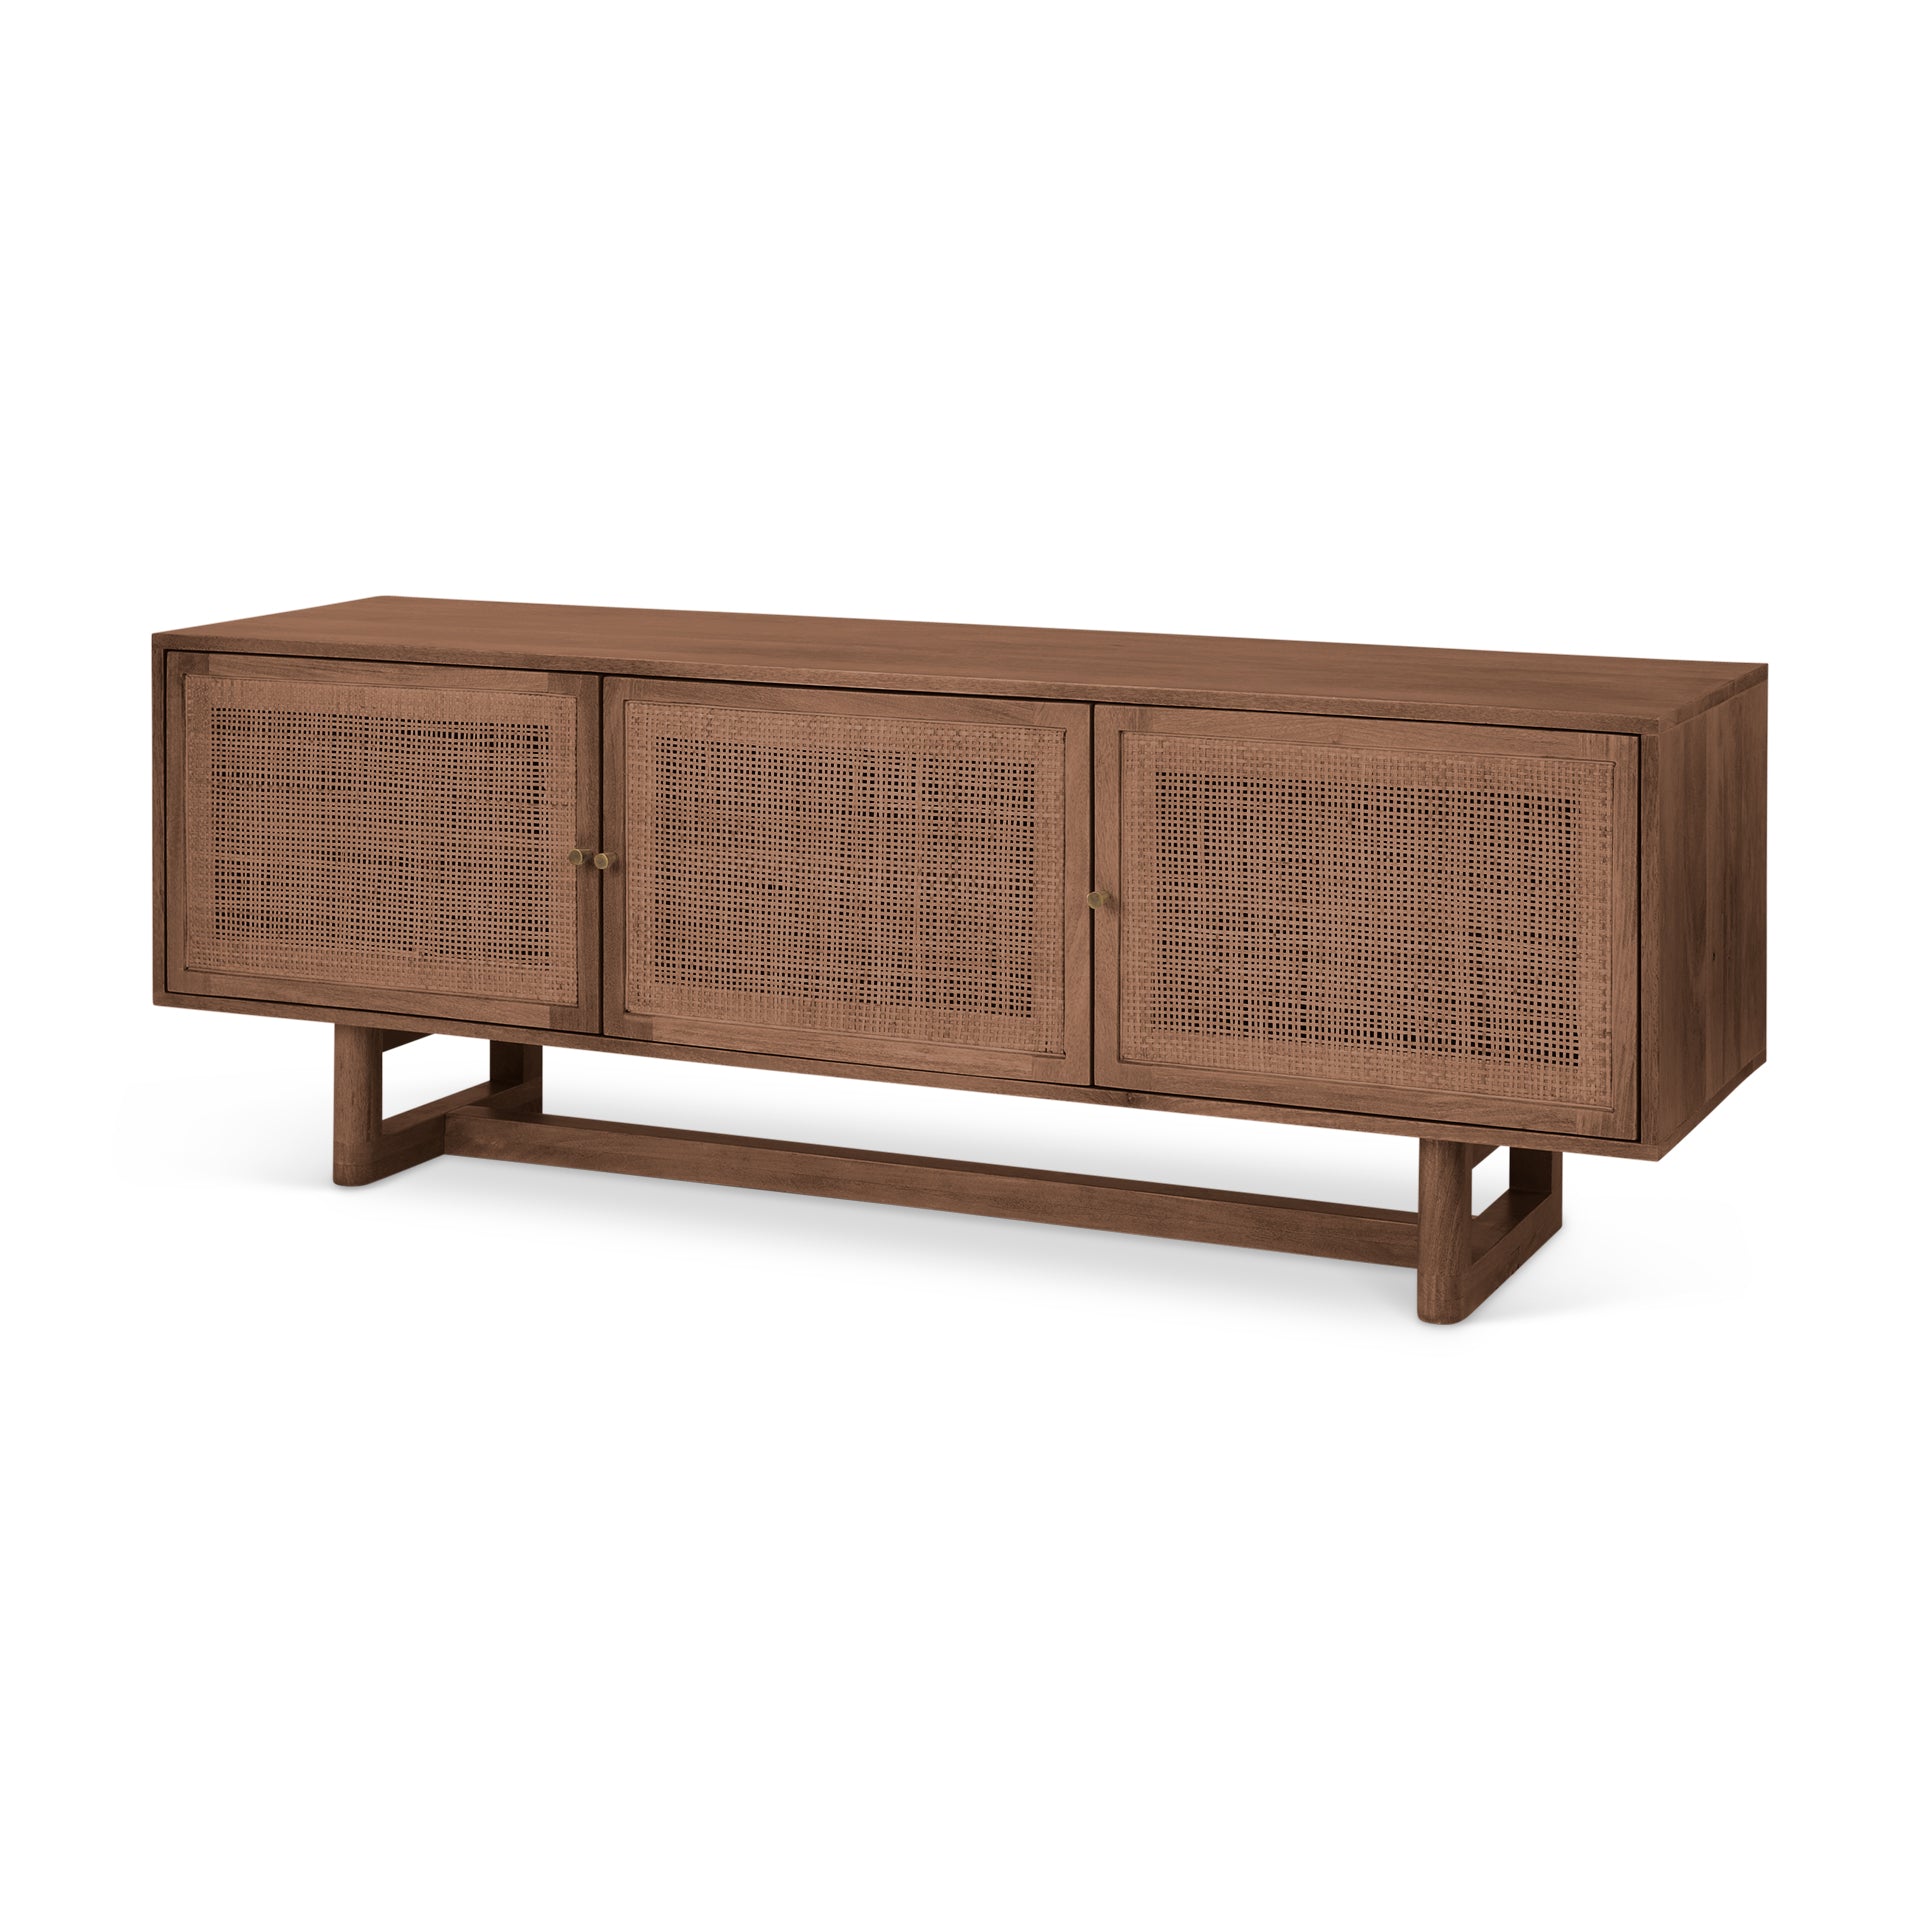 Grier Media Console - Brown